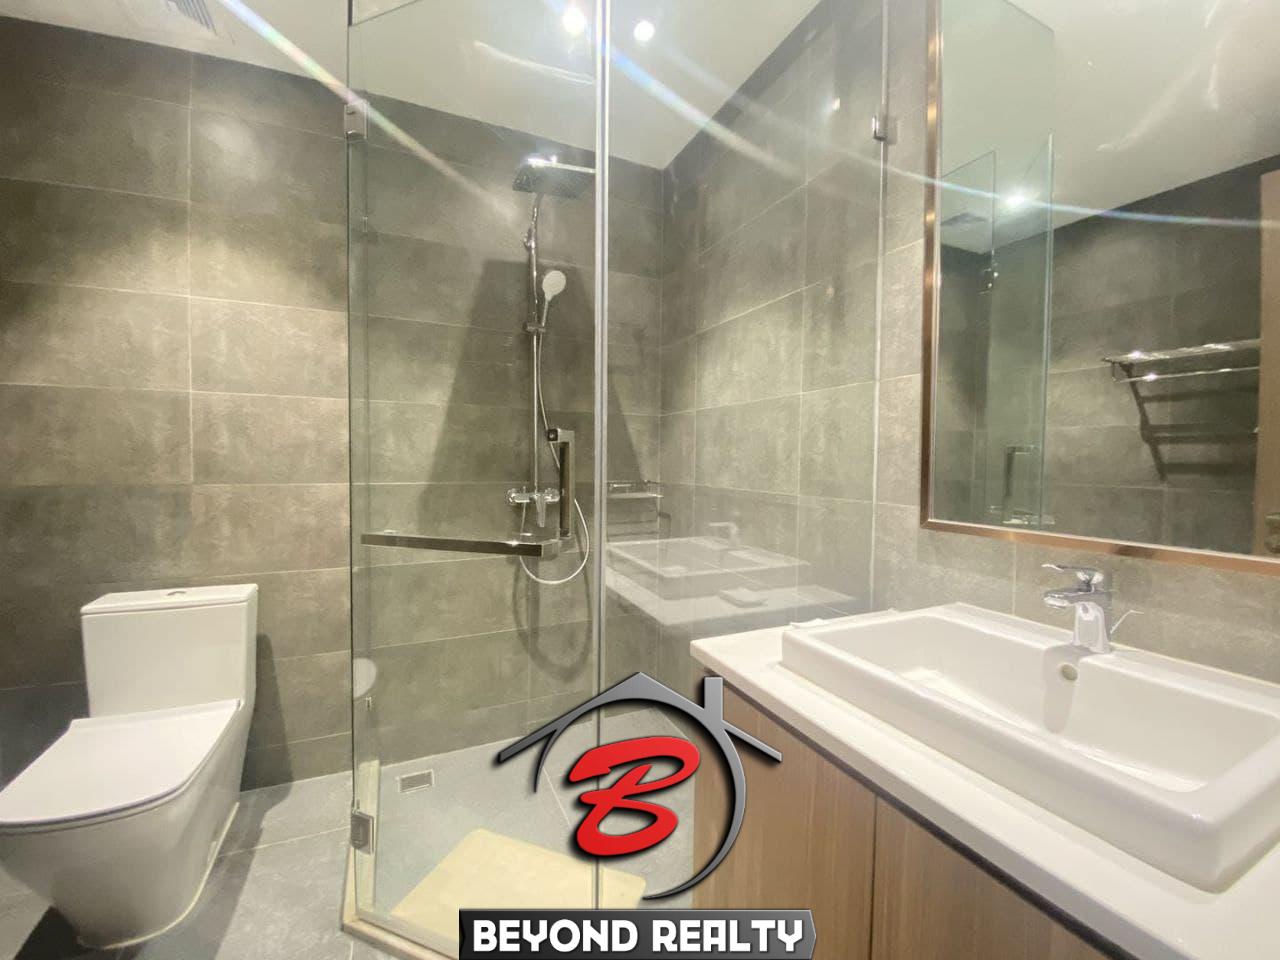 a bathroom of 2br spacious luxury serviced condo for rent in Veal Vong 7 Makara Phnom Penh